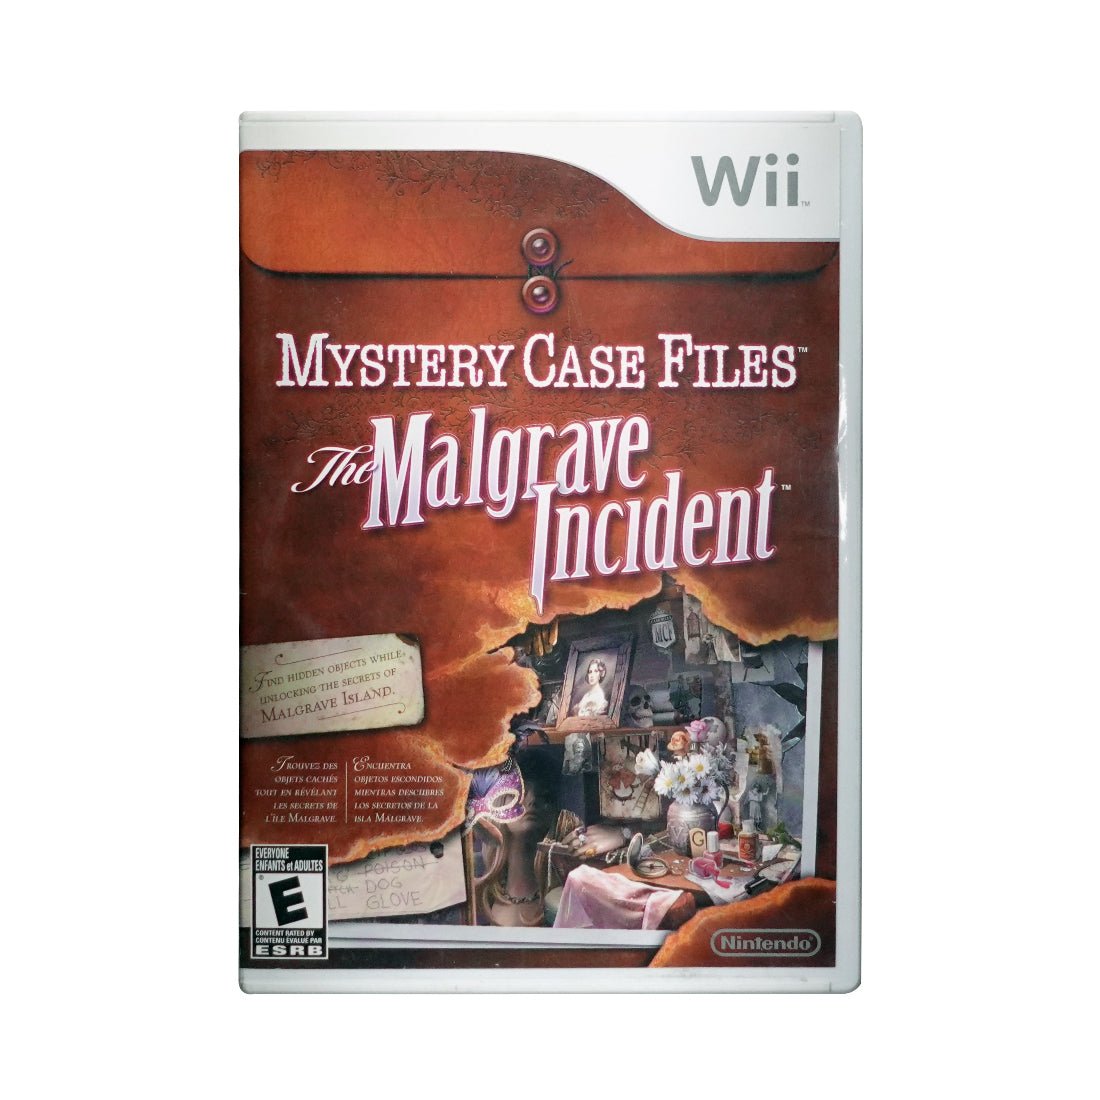 (Pre-Owned) Mystery Case Files: The Malgrave Incident - Nintendo WII - Store 974 | ستور ٩٧٤